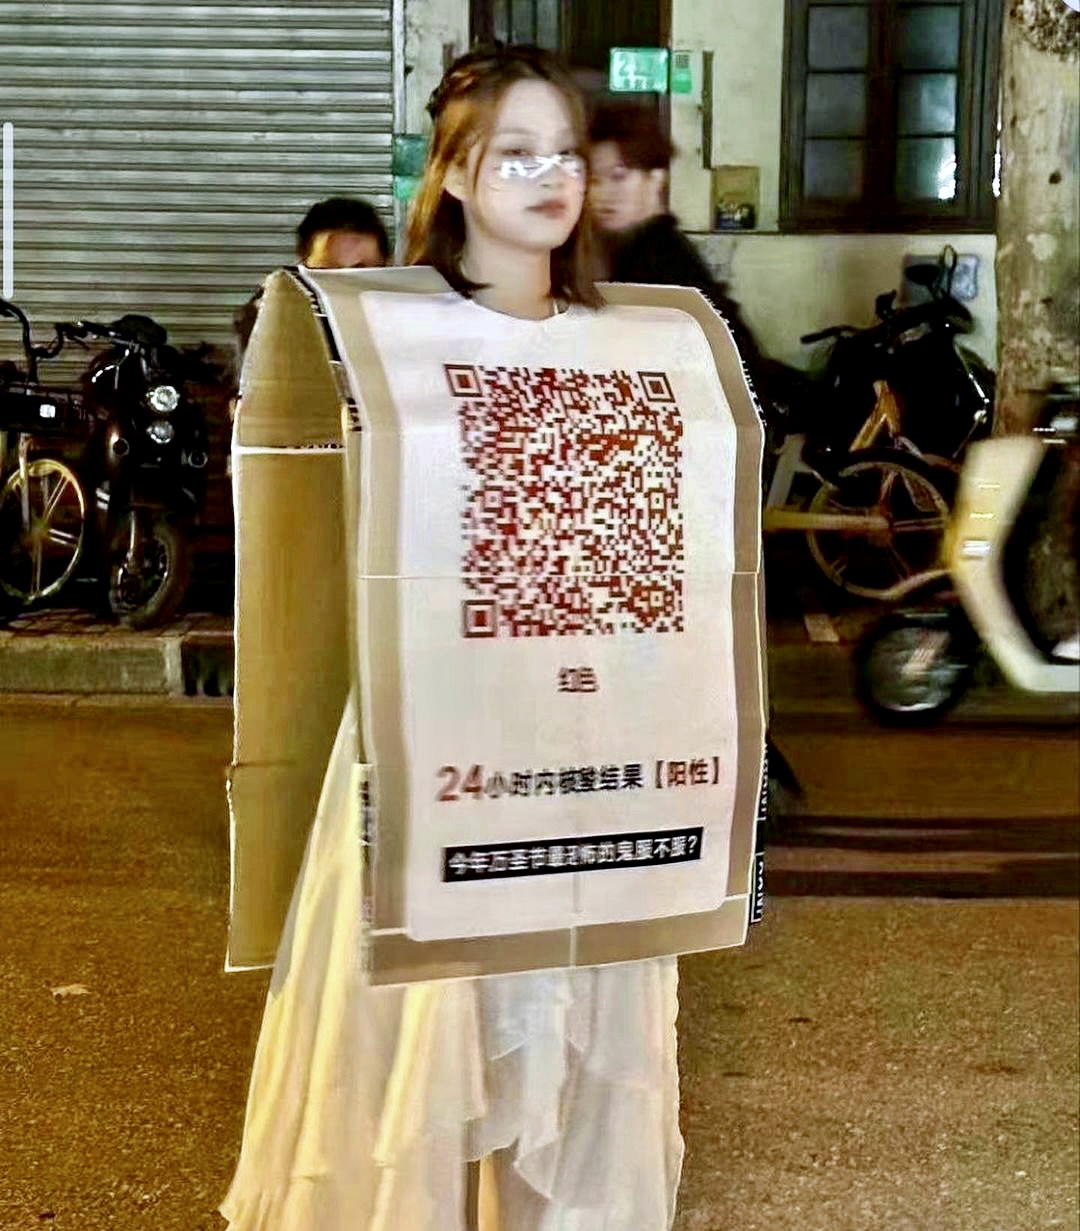 People In China Are Mocking Their Own Lives Under COVID Lockdown For Halloween And It’s So Funny